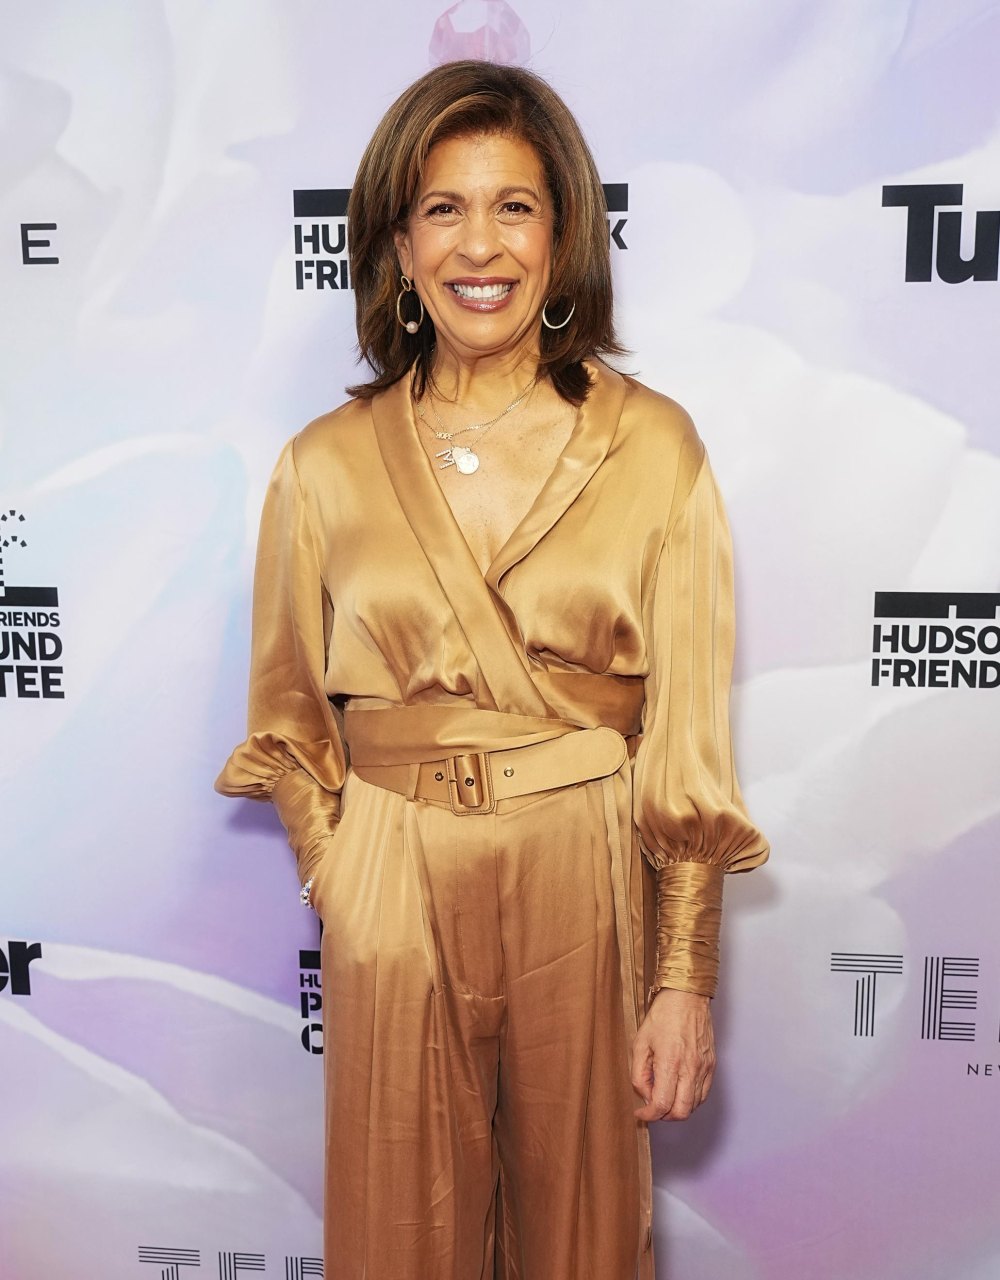 Everything Today Anchor Hoda Kotb Has Said About Marriage Breakups and Dating Through the Years 769